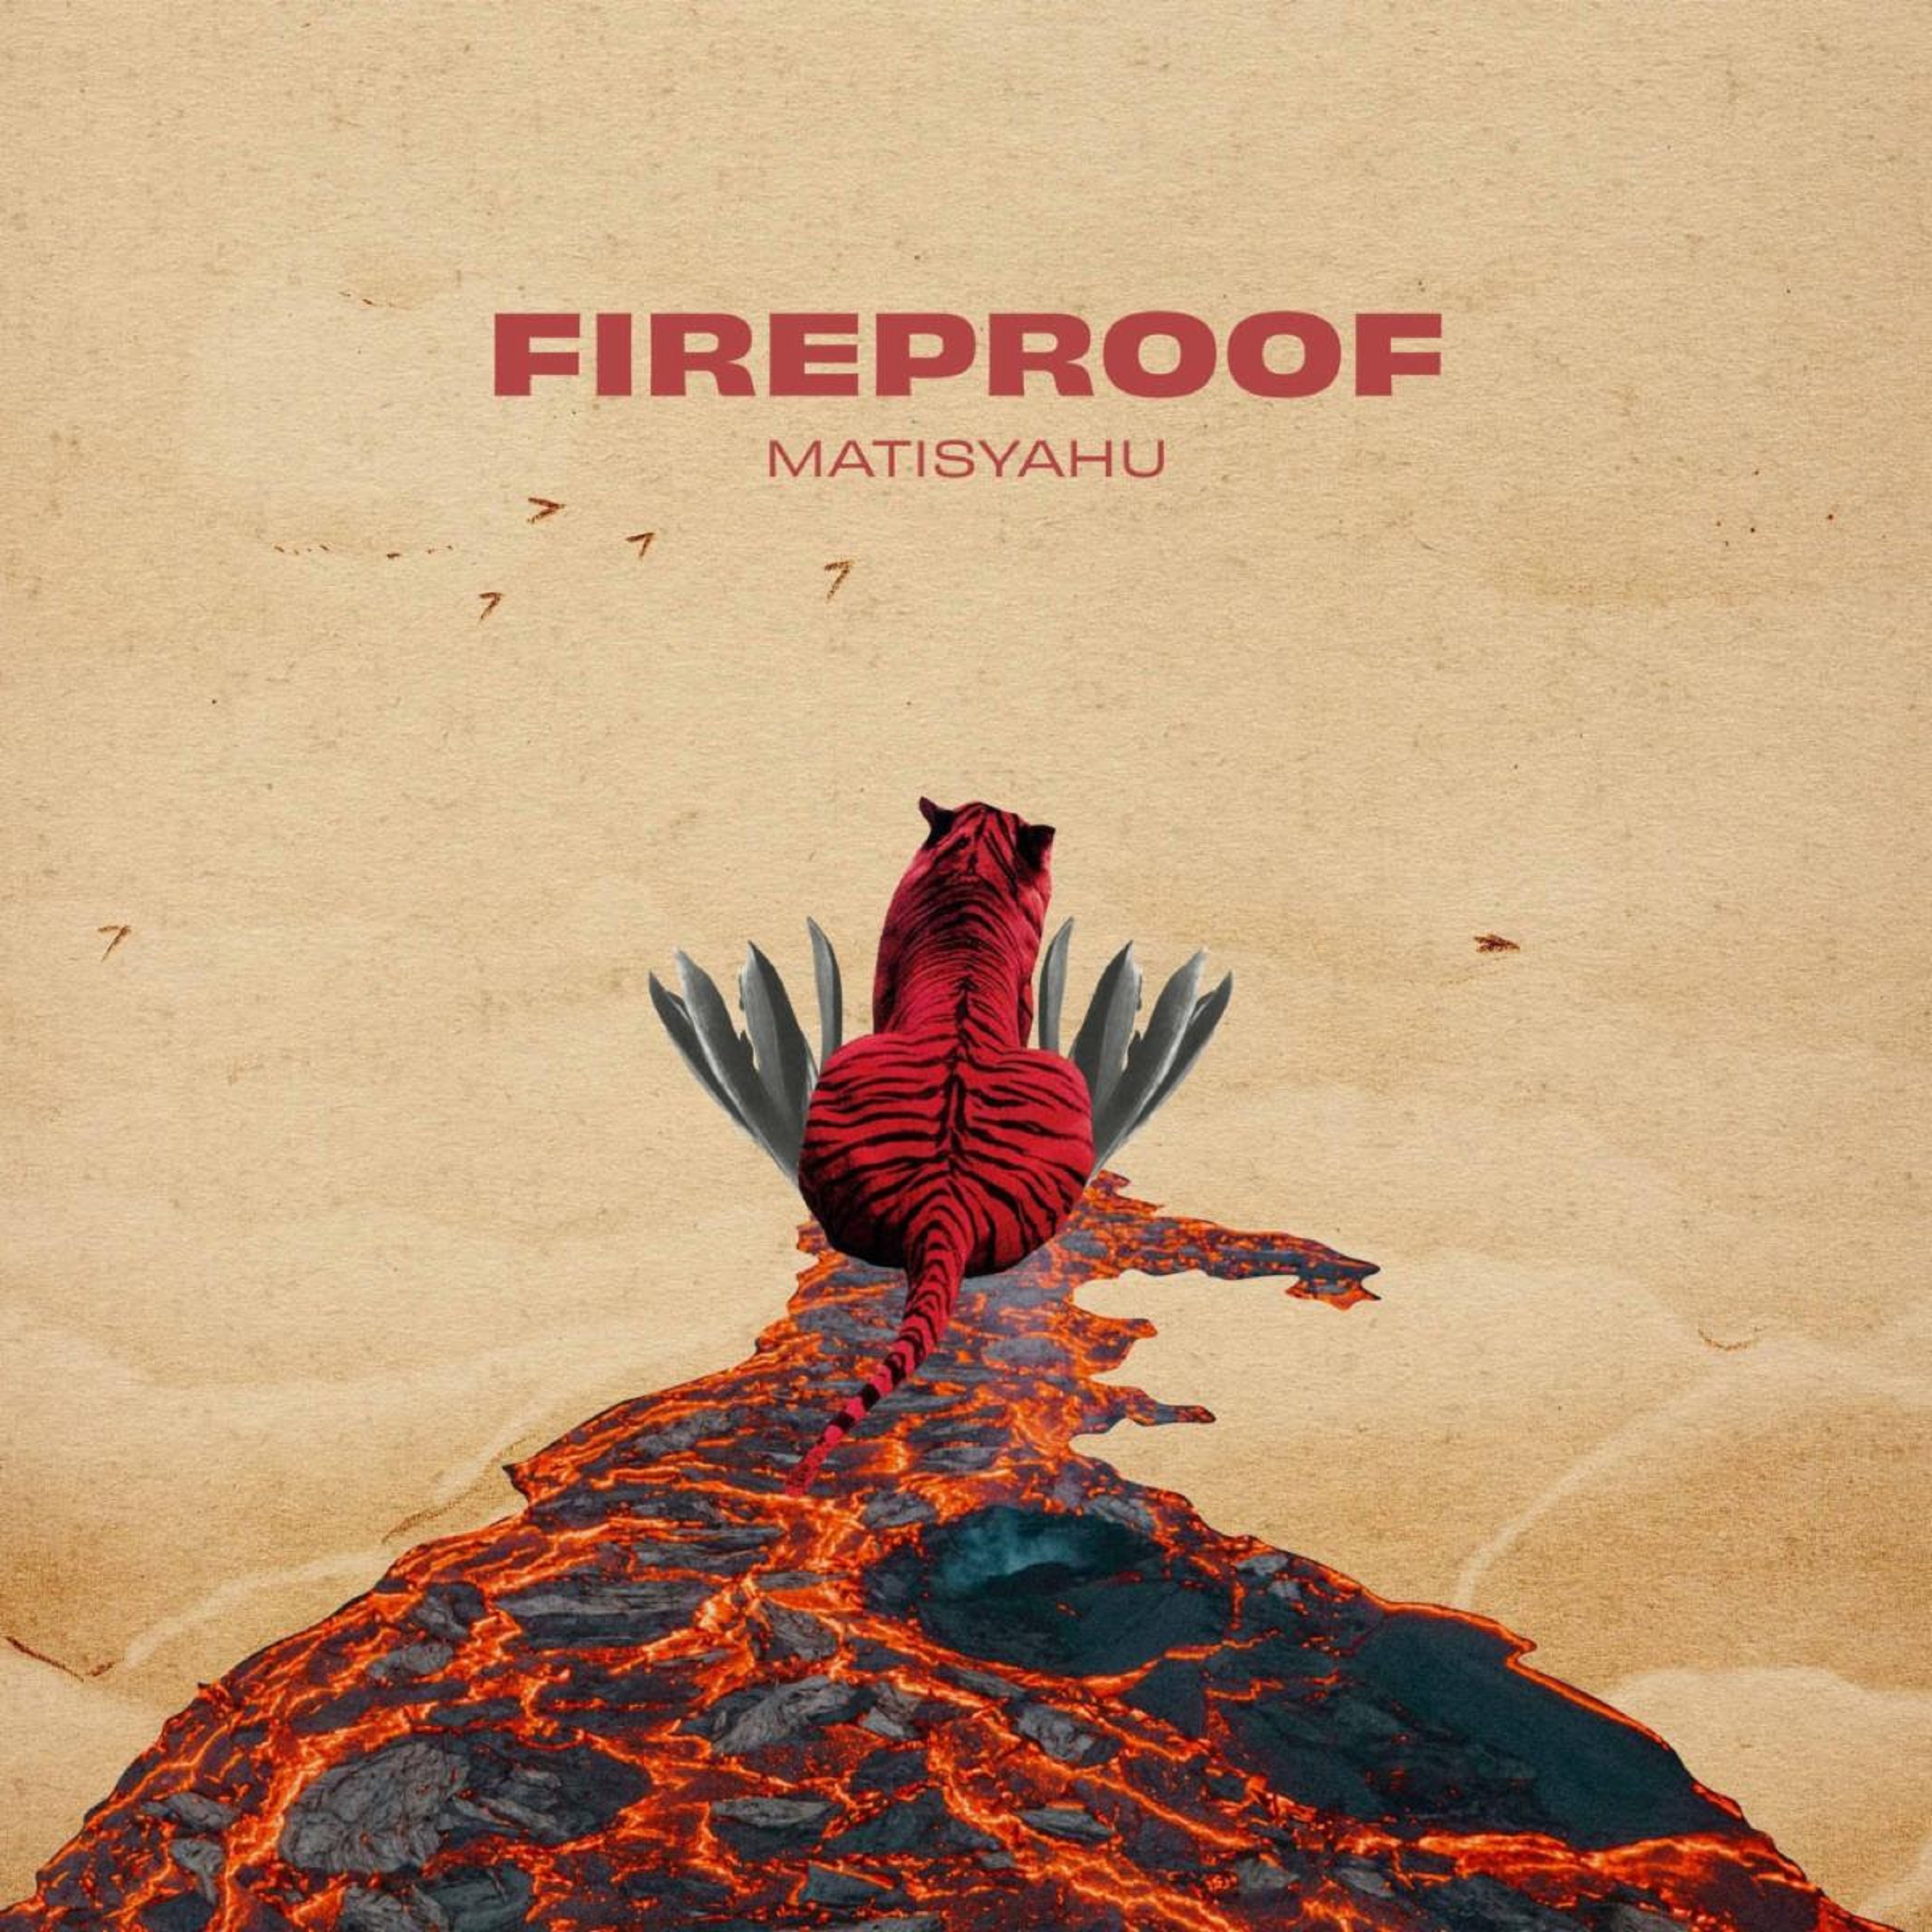 Matisyahu Releases Timely New Single "Fireproof"